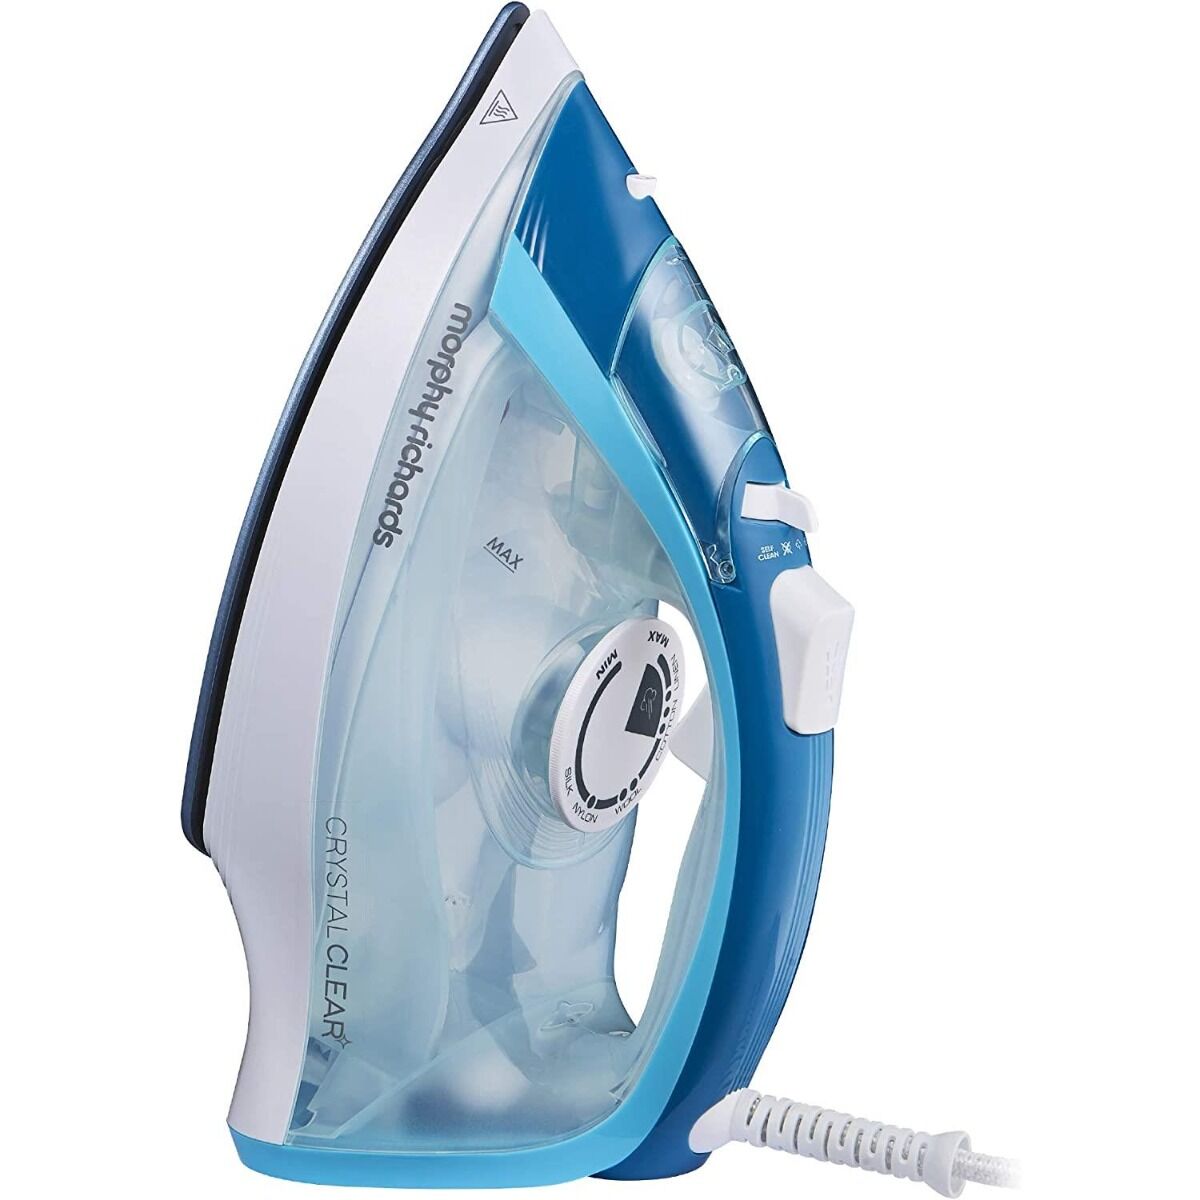 Morphy Richards 300300 Crystal Clear Steam Iron